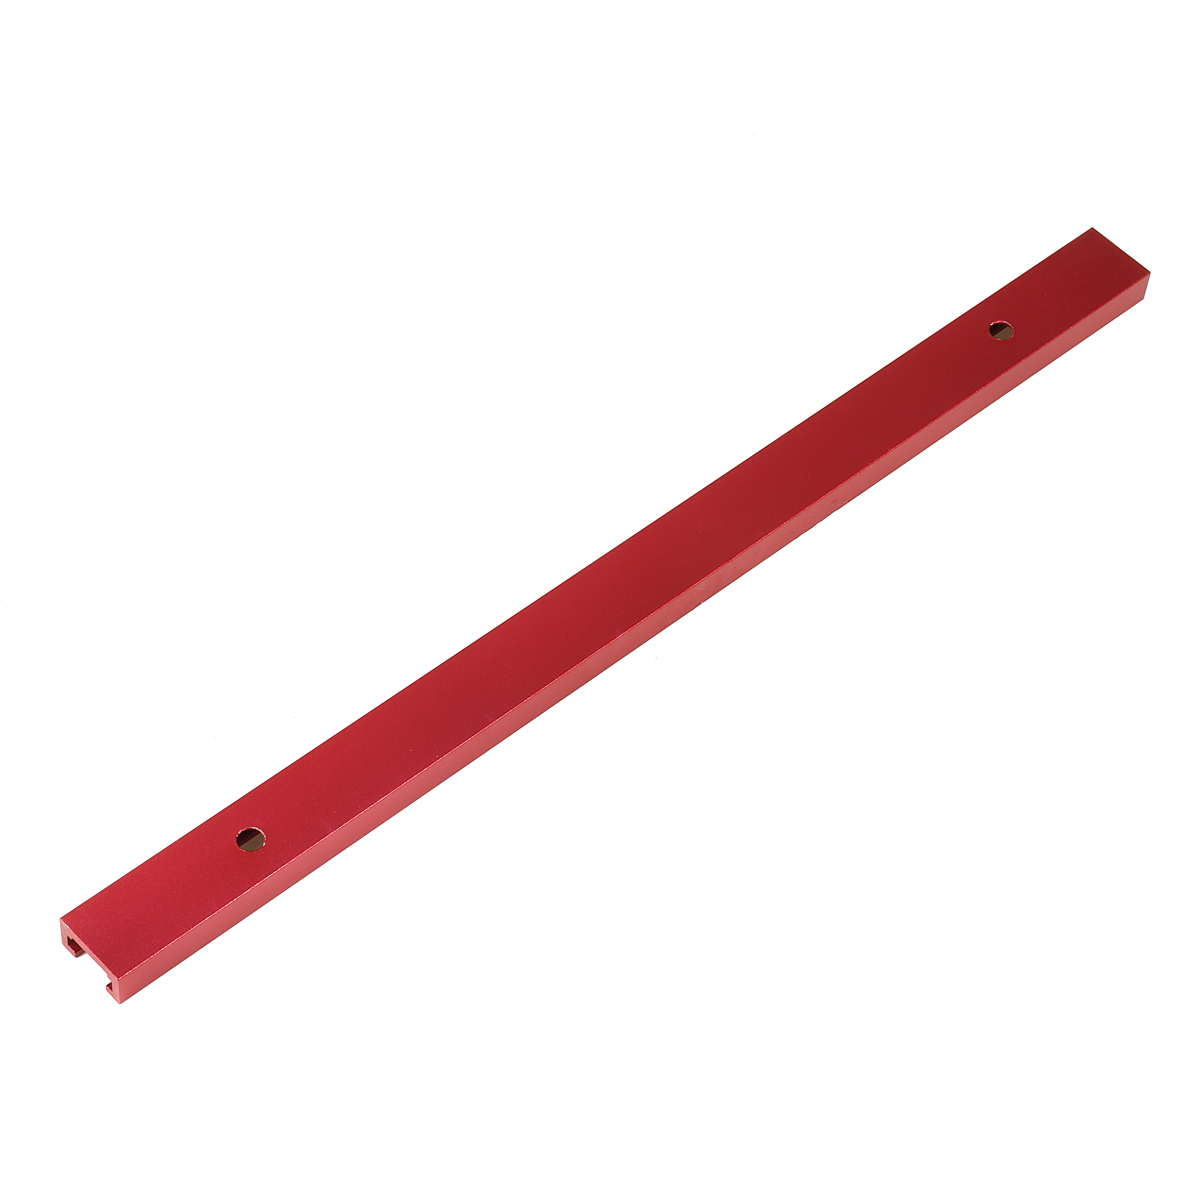 Red-Aluminum-Alloy-300-1220mm-T-track-T-slot-Miter-Track-Jig-T-Screw-Fixture-Slot-19x95mm-For-Table--1682608-3